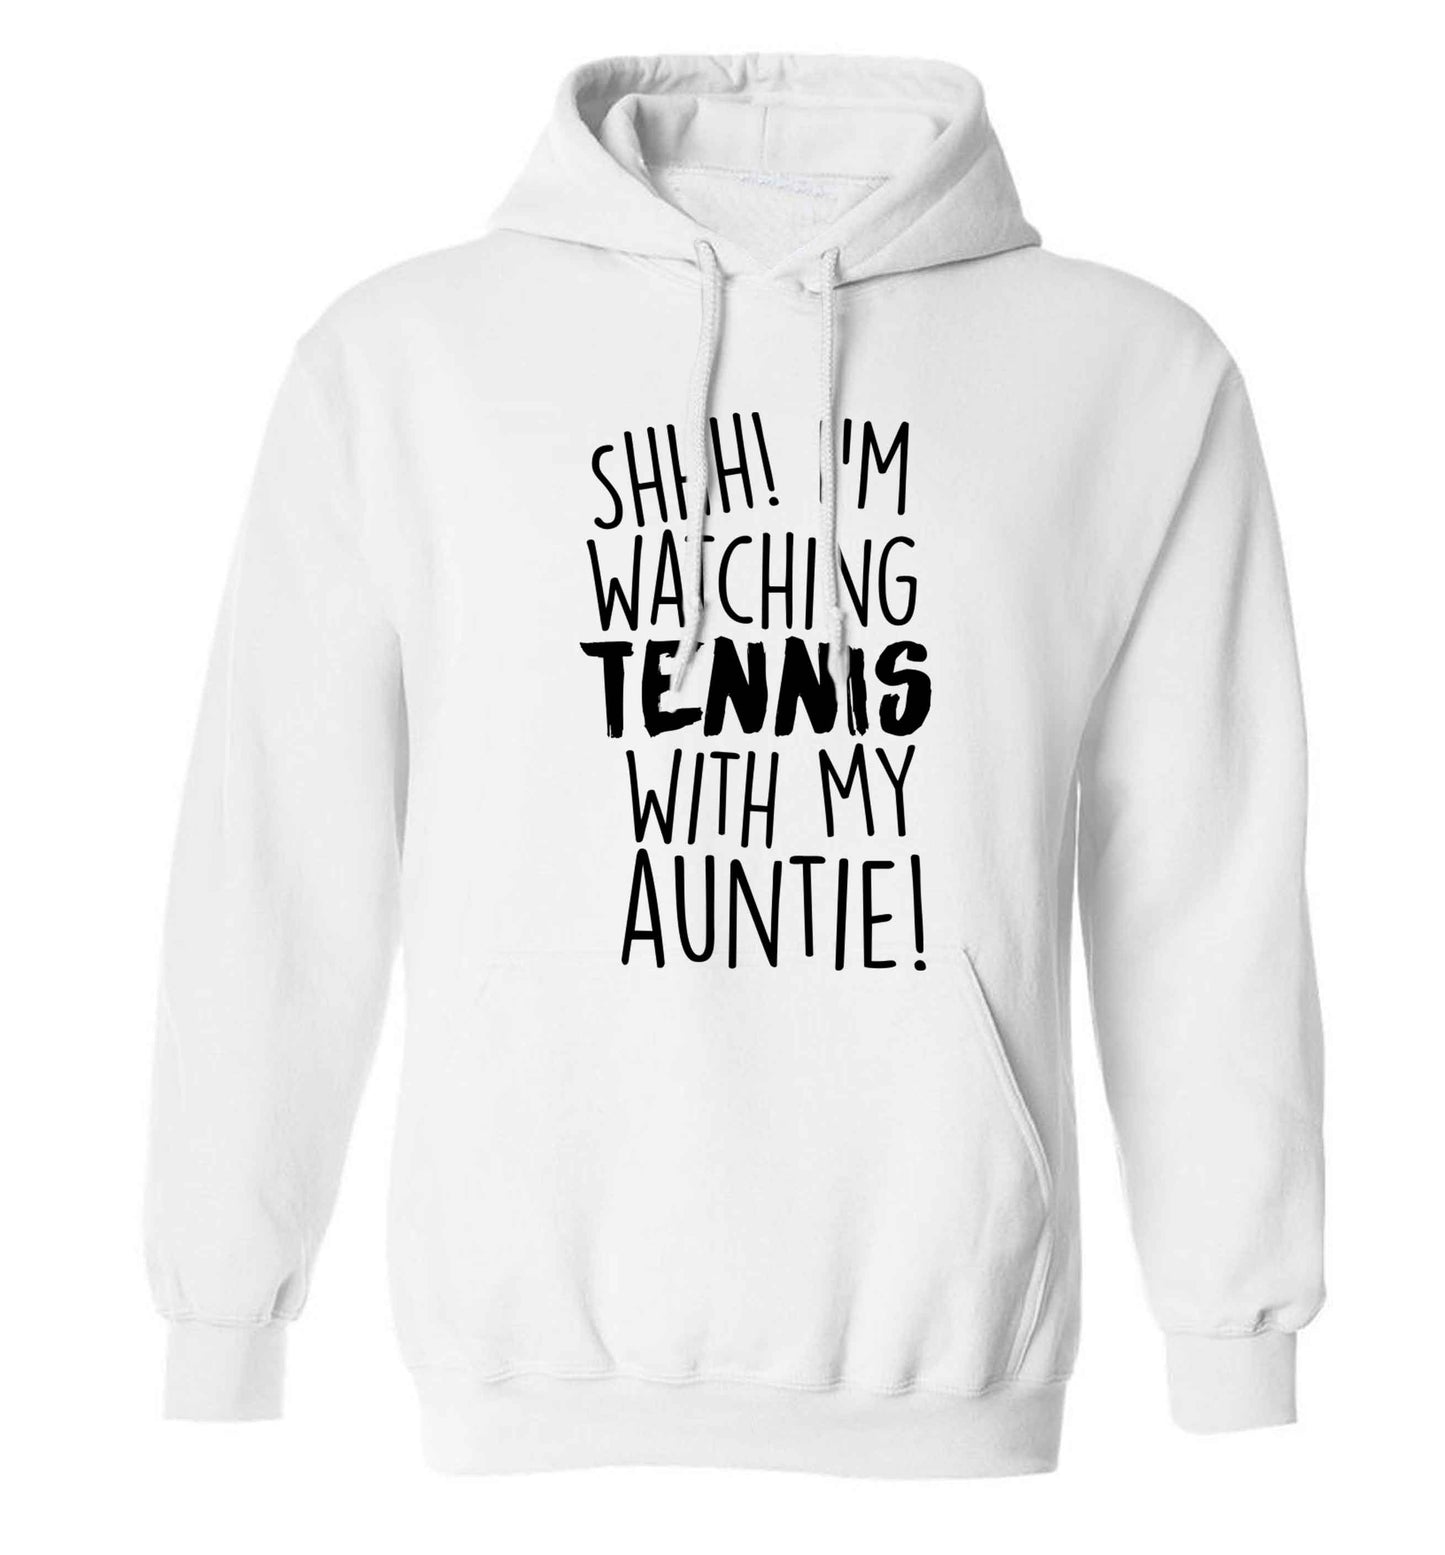 Shh! I'm watching tennis with my auntie! adults unisex white hoodie 2XL